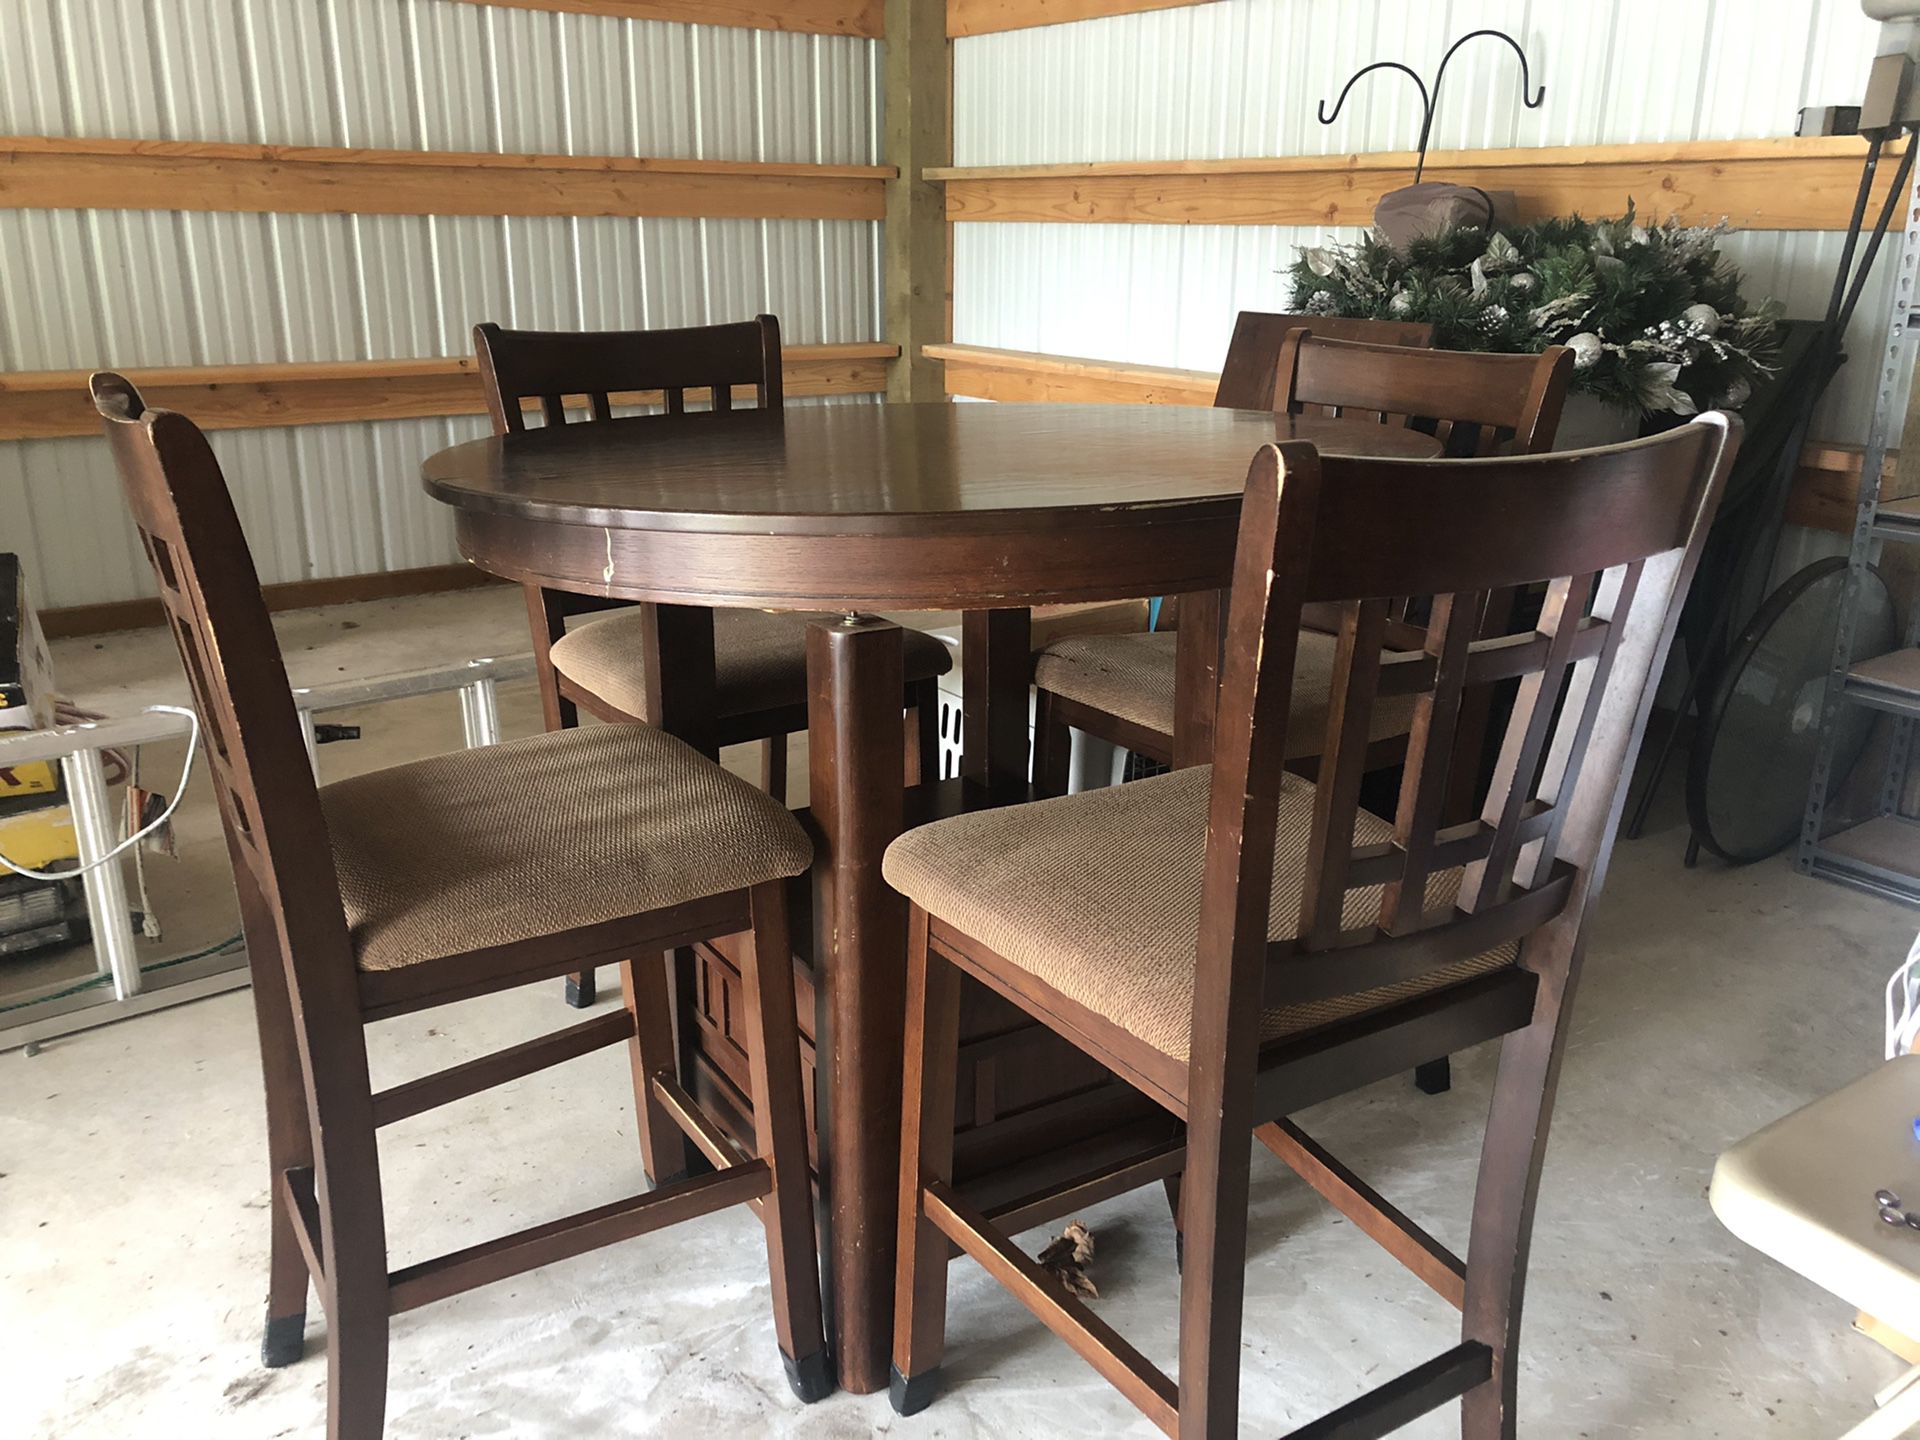 Oak kitchen table, four chairs and a leaf.